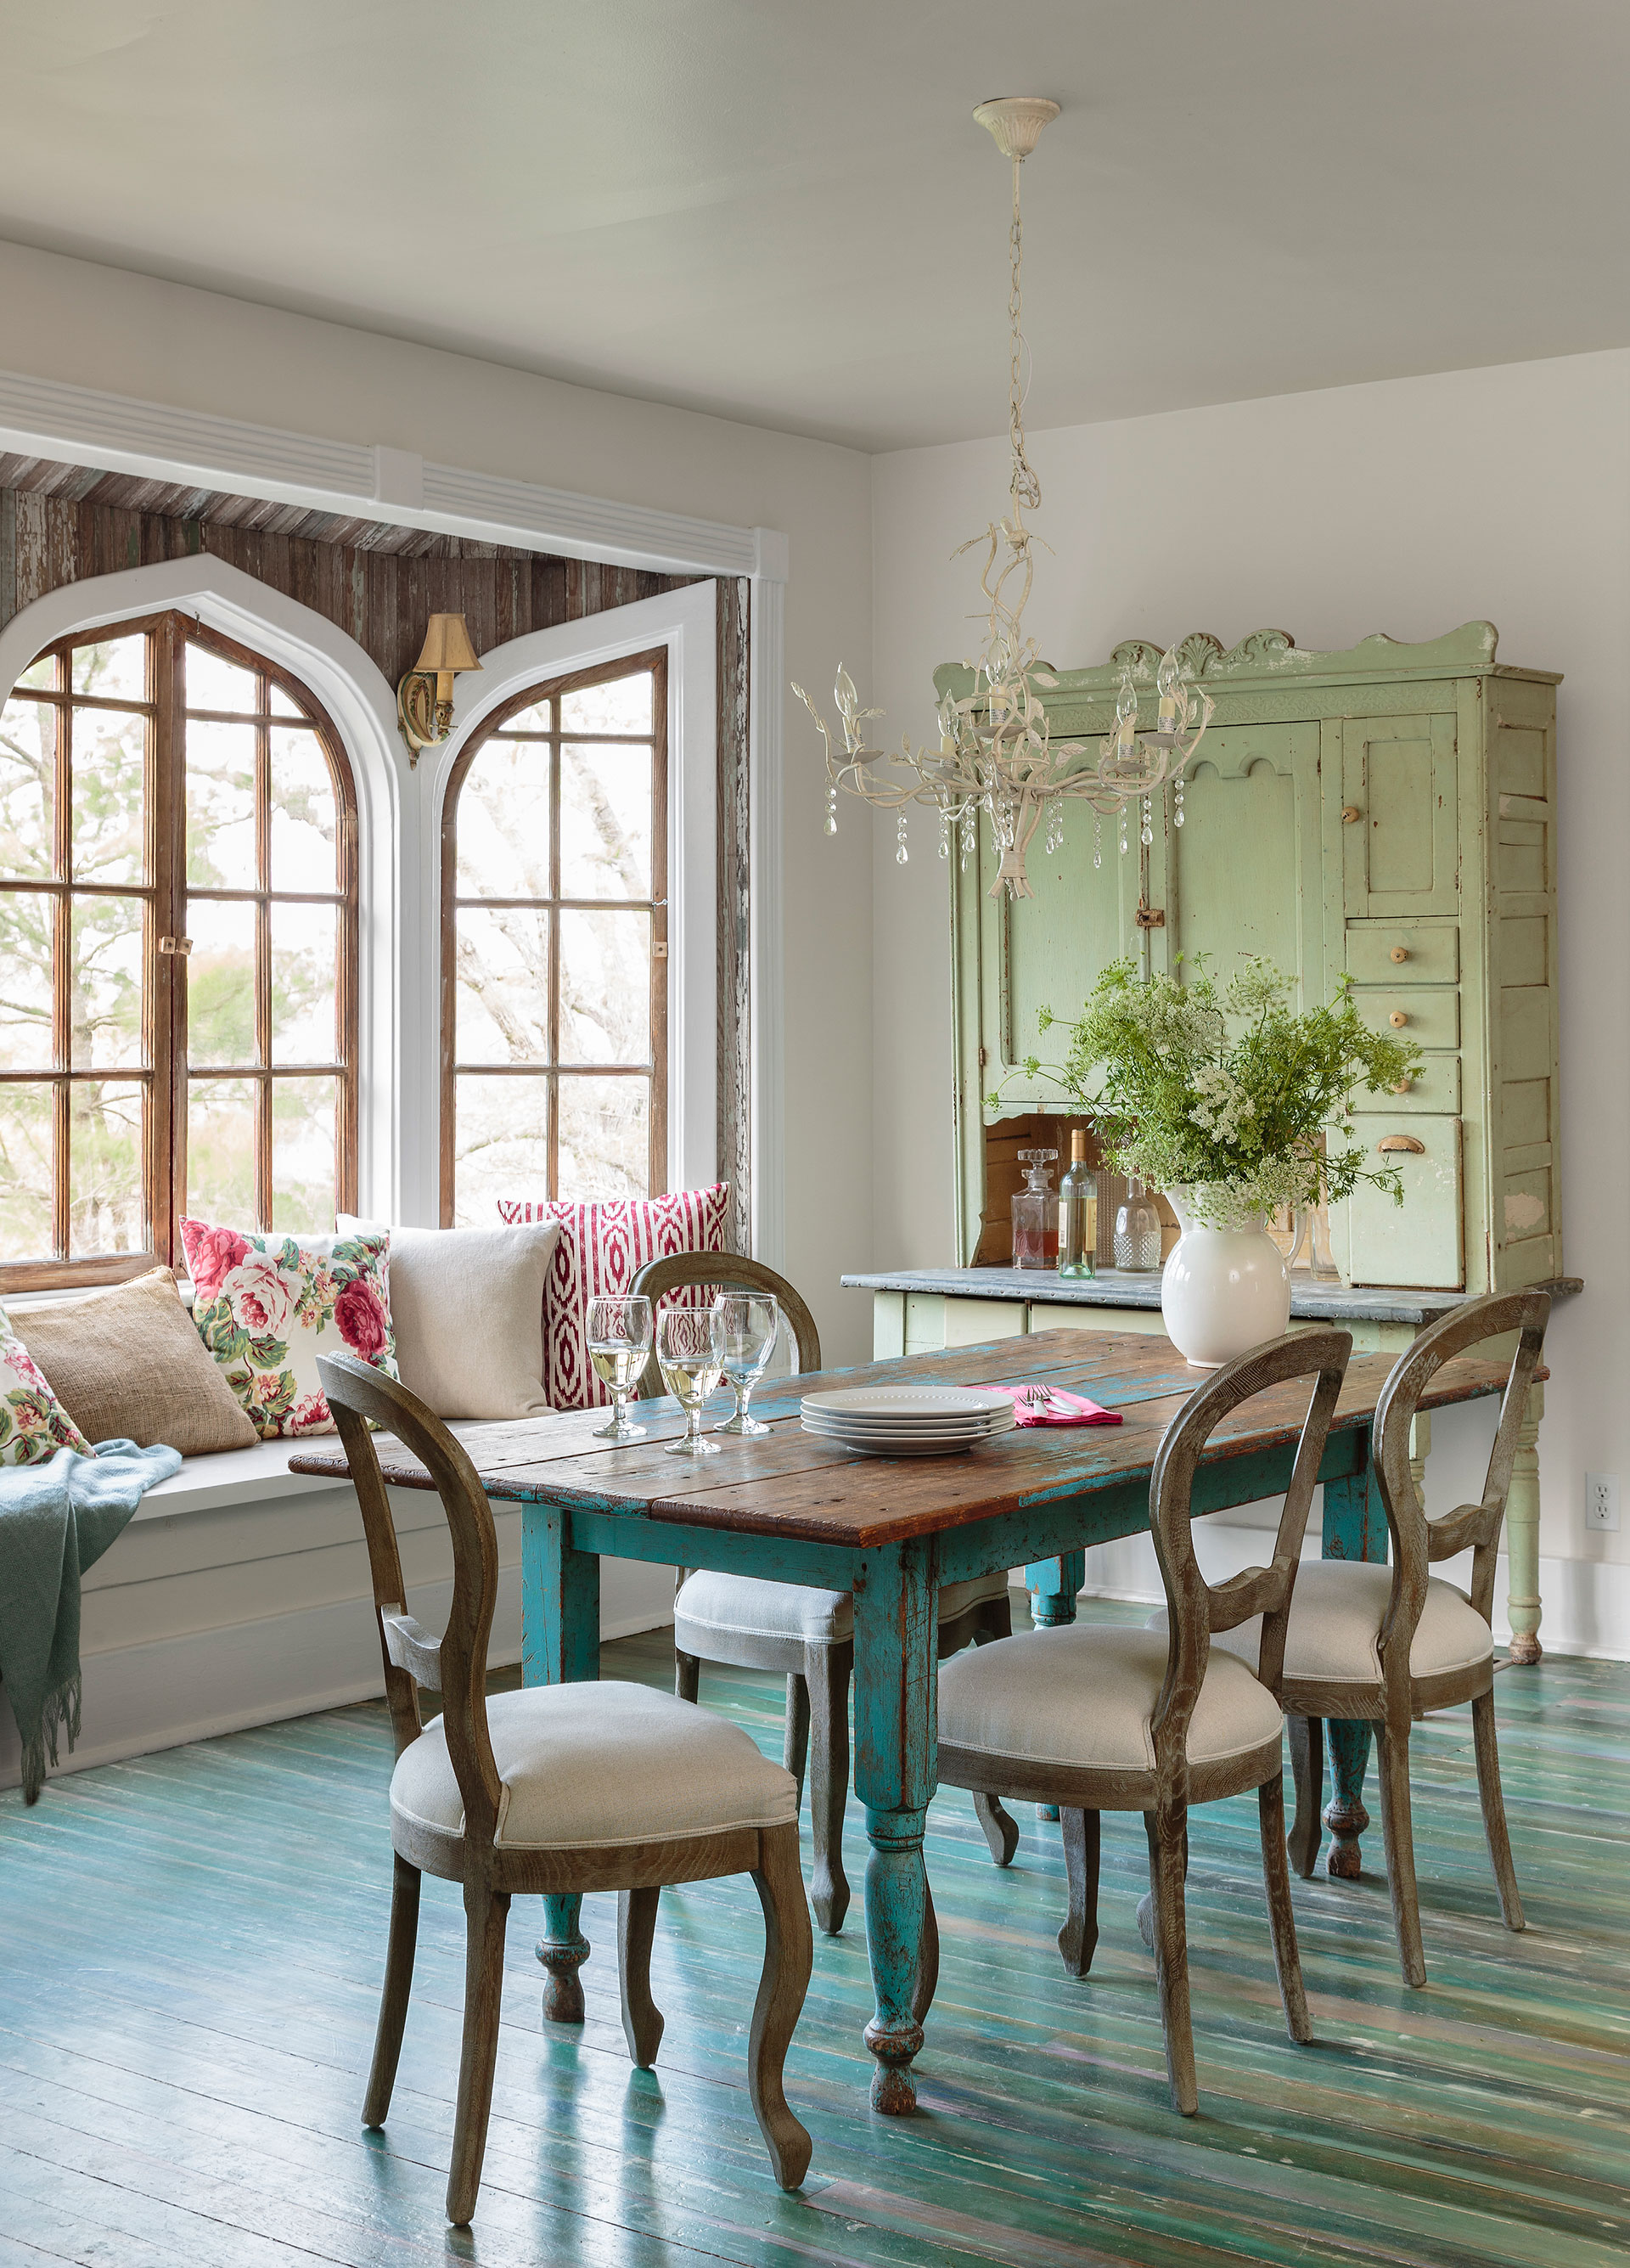 85 best dining room decorating ideas - country dining room decor BYOWJPQ